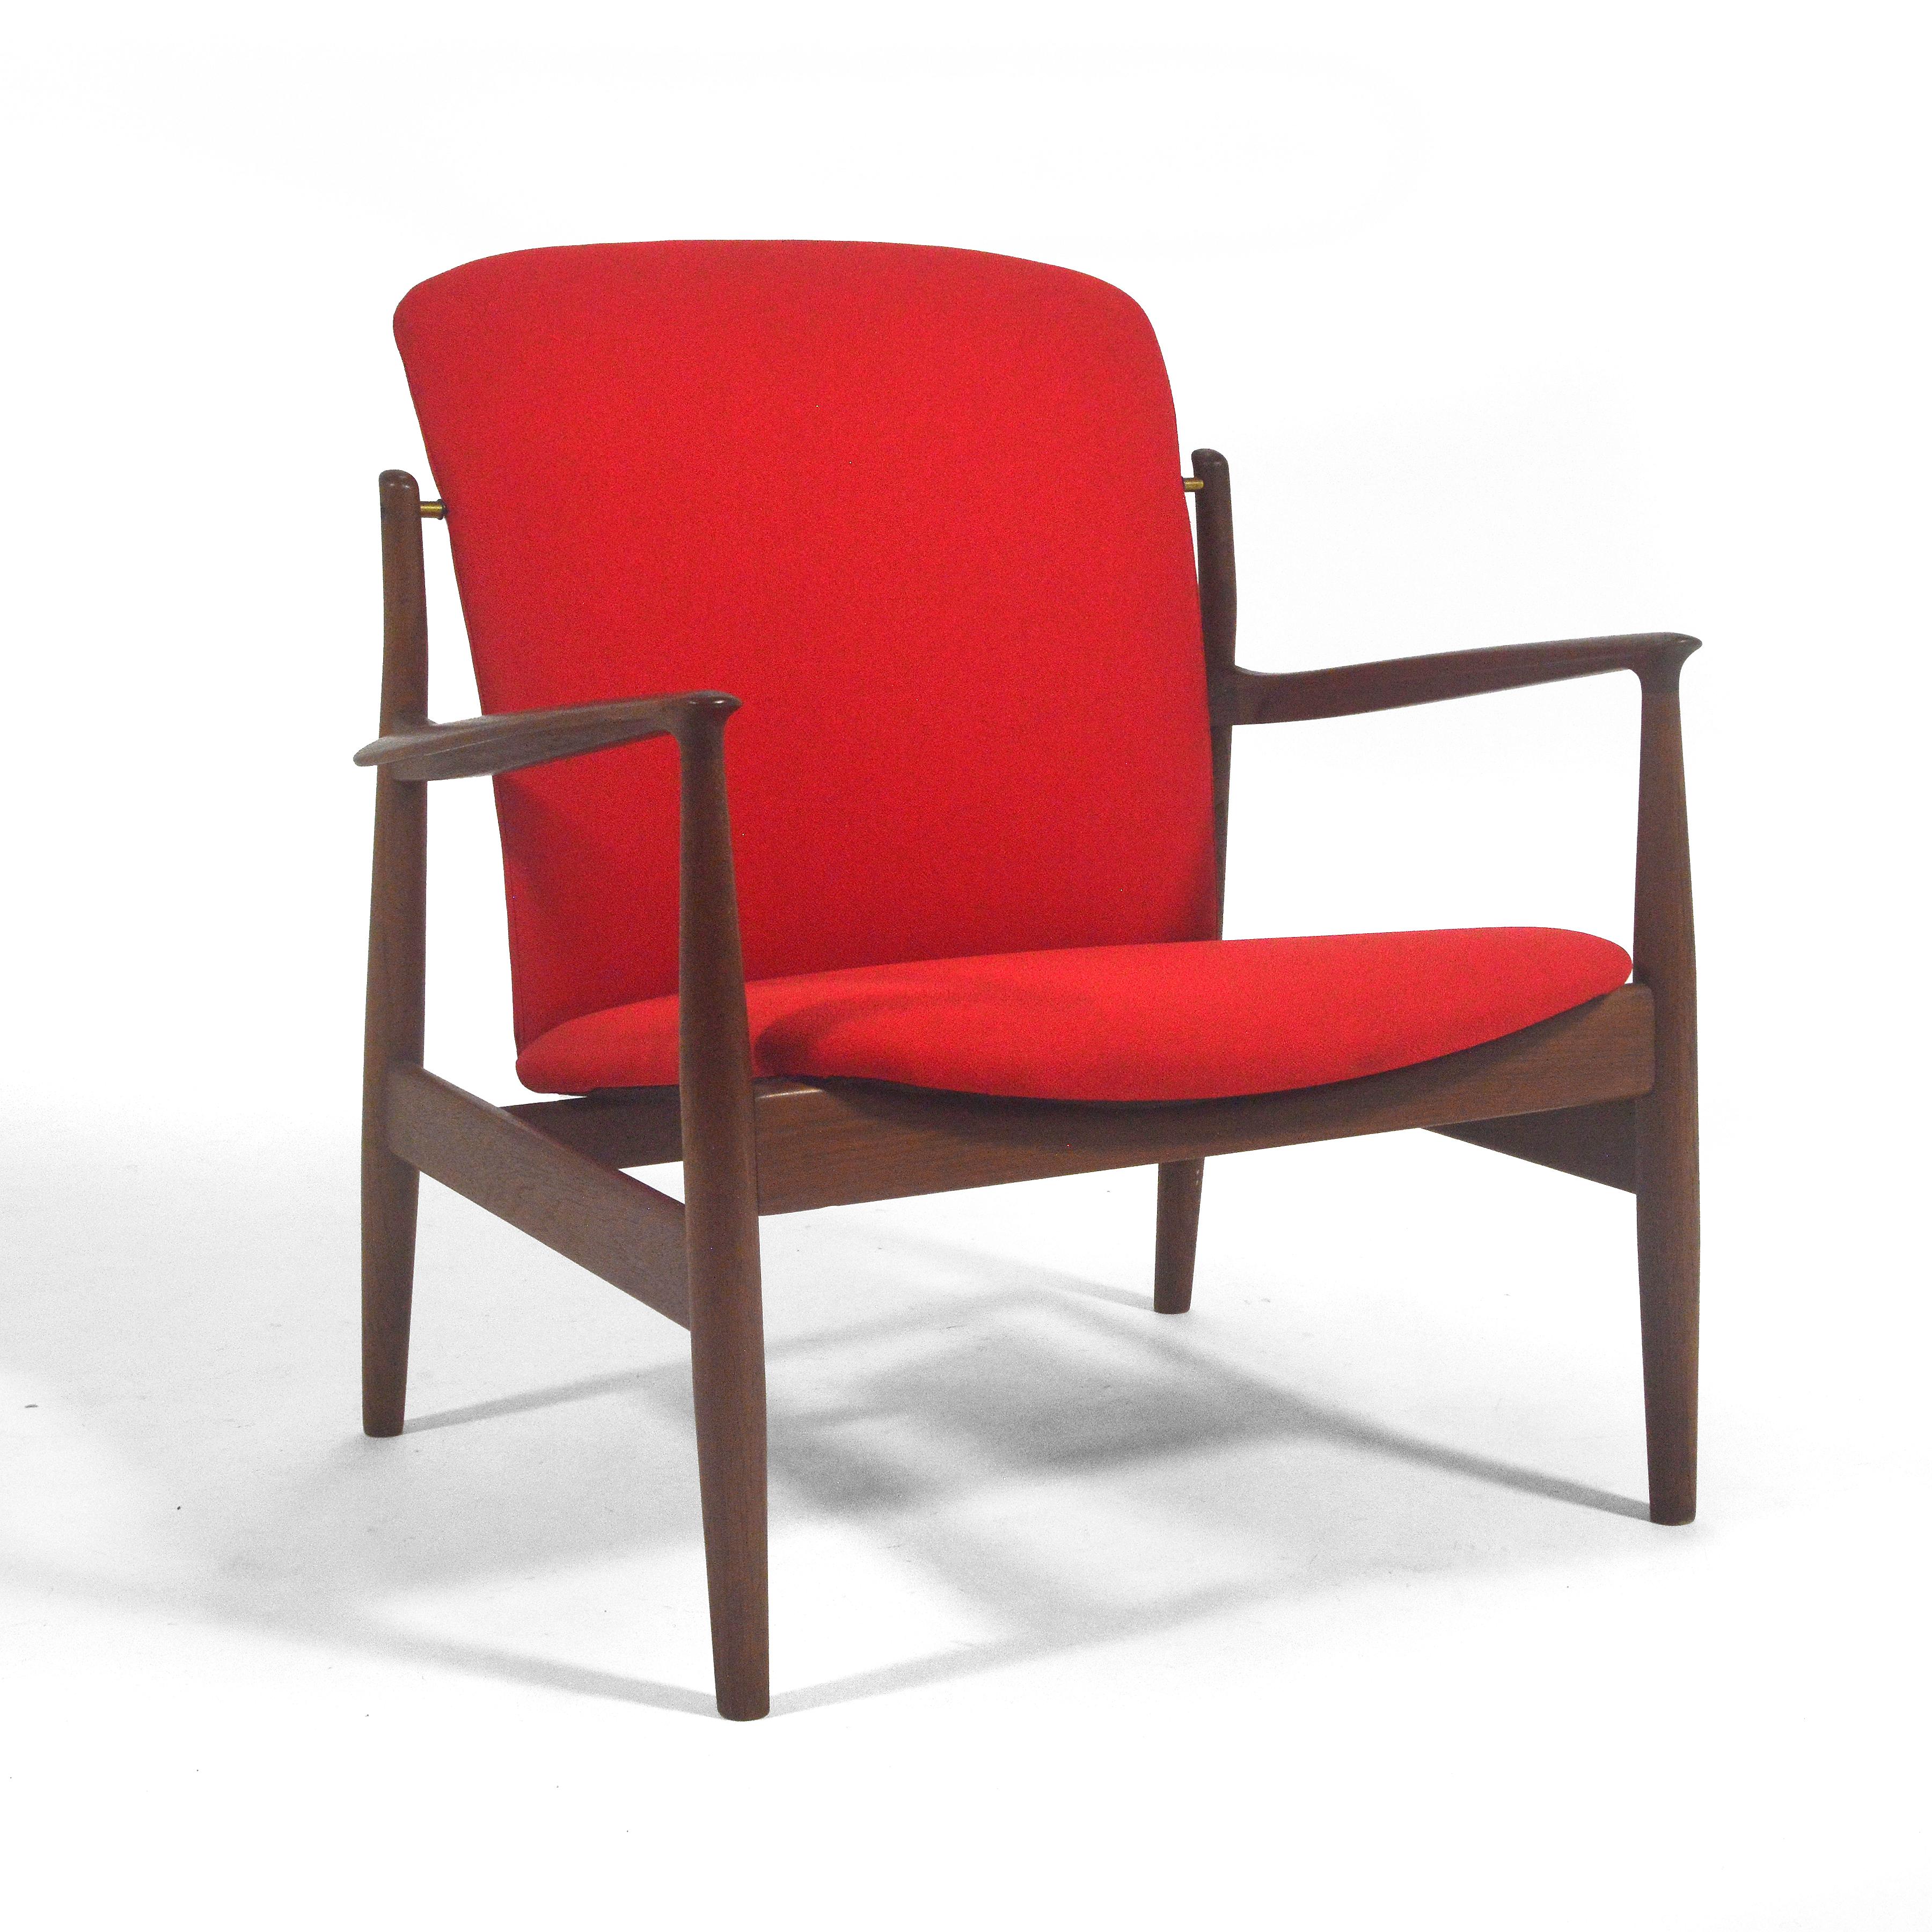 This handsome easy chair by Finn Juhl for France & Sons is a rare model fd141. It shares qualities with many of his famous chairs including the Chieftain, the #45 chair, and the Delegate's chair. The dark, rich teak frame supports a set upholstered